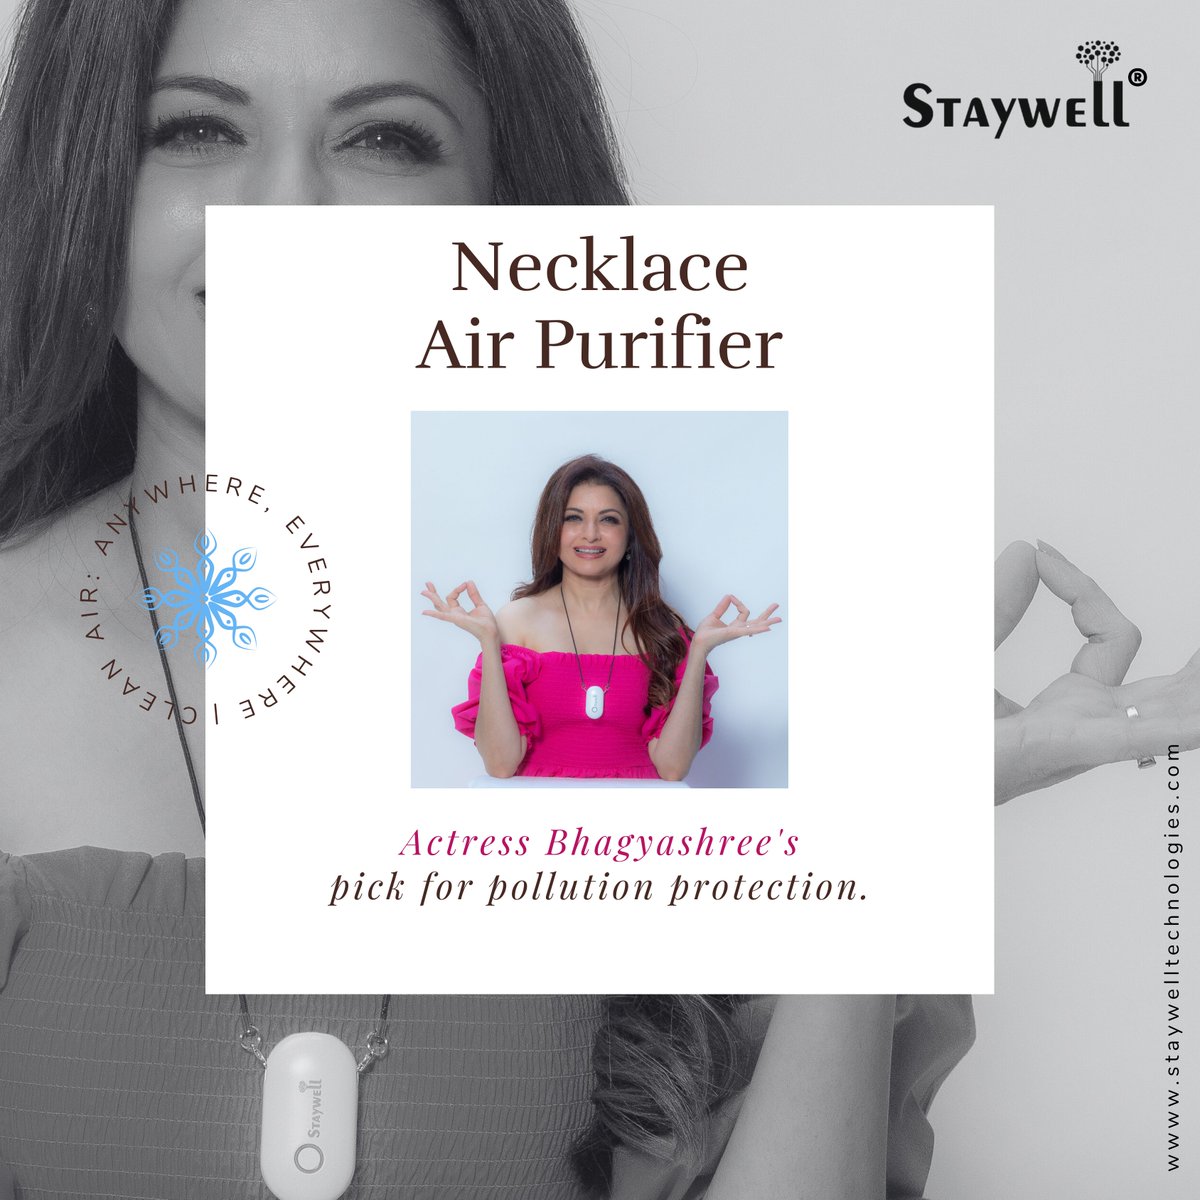 'Introducing the Staywell Necklace Air Purifier – the ultimate pollution protection endorsed by actress Bhagyashree herself! Stay safe, stay stylish, and breathe easy with this revolutionary tech on your wrist. Don't just survive, thrive in any environment!'

#airpurifier…